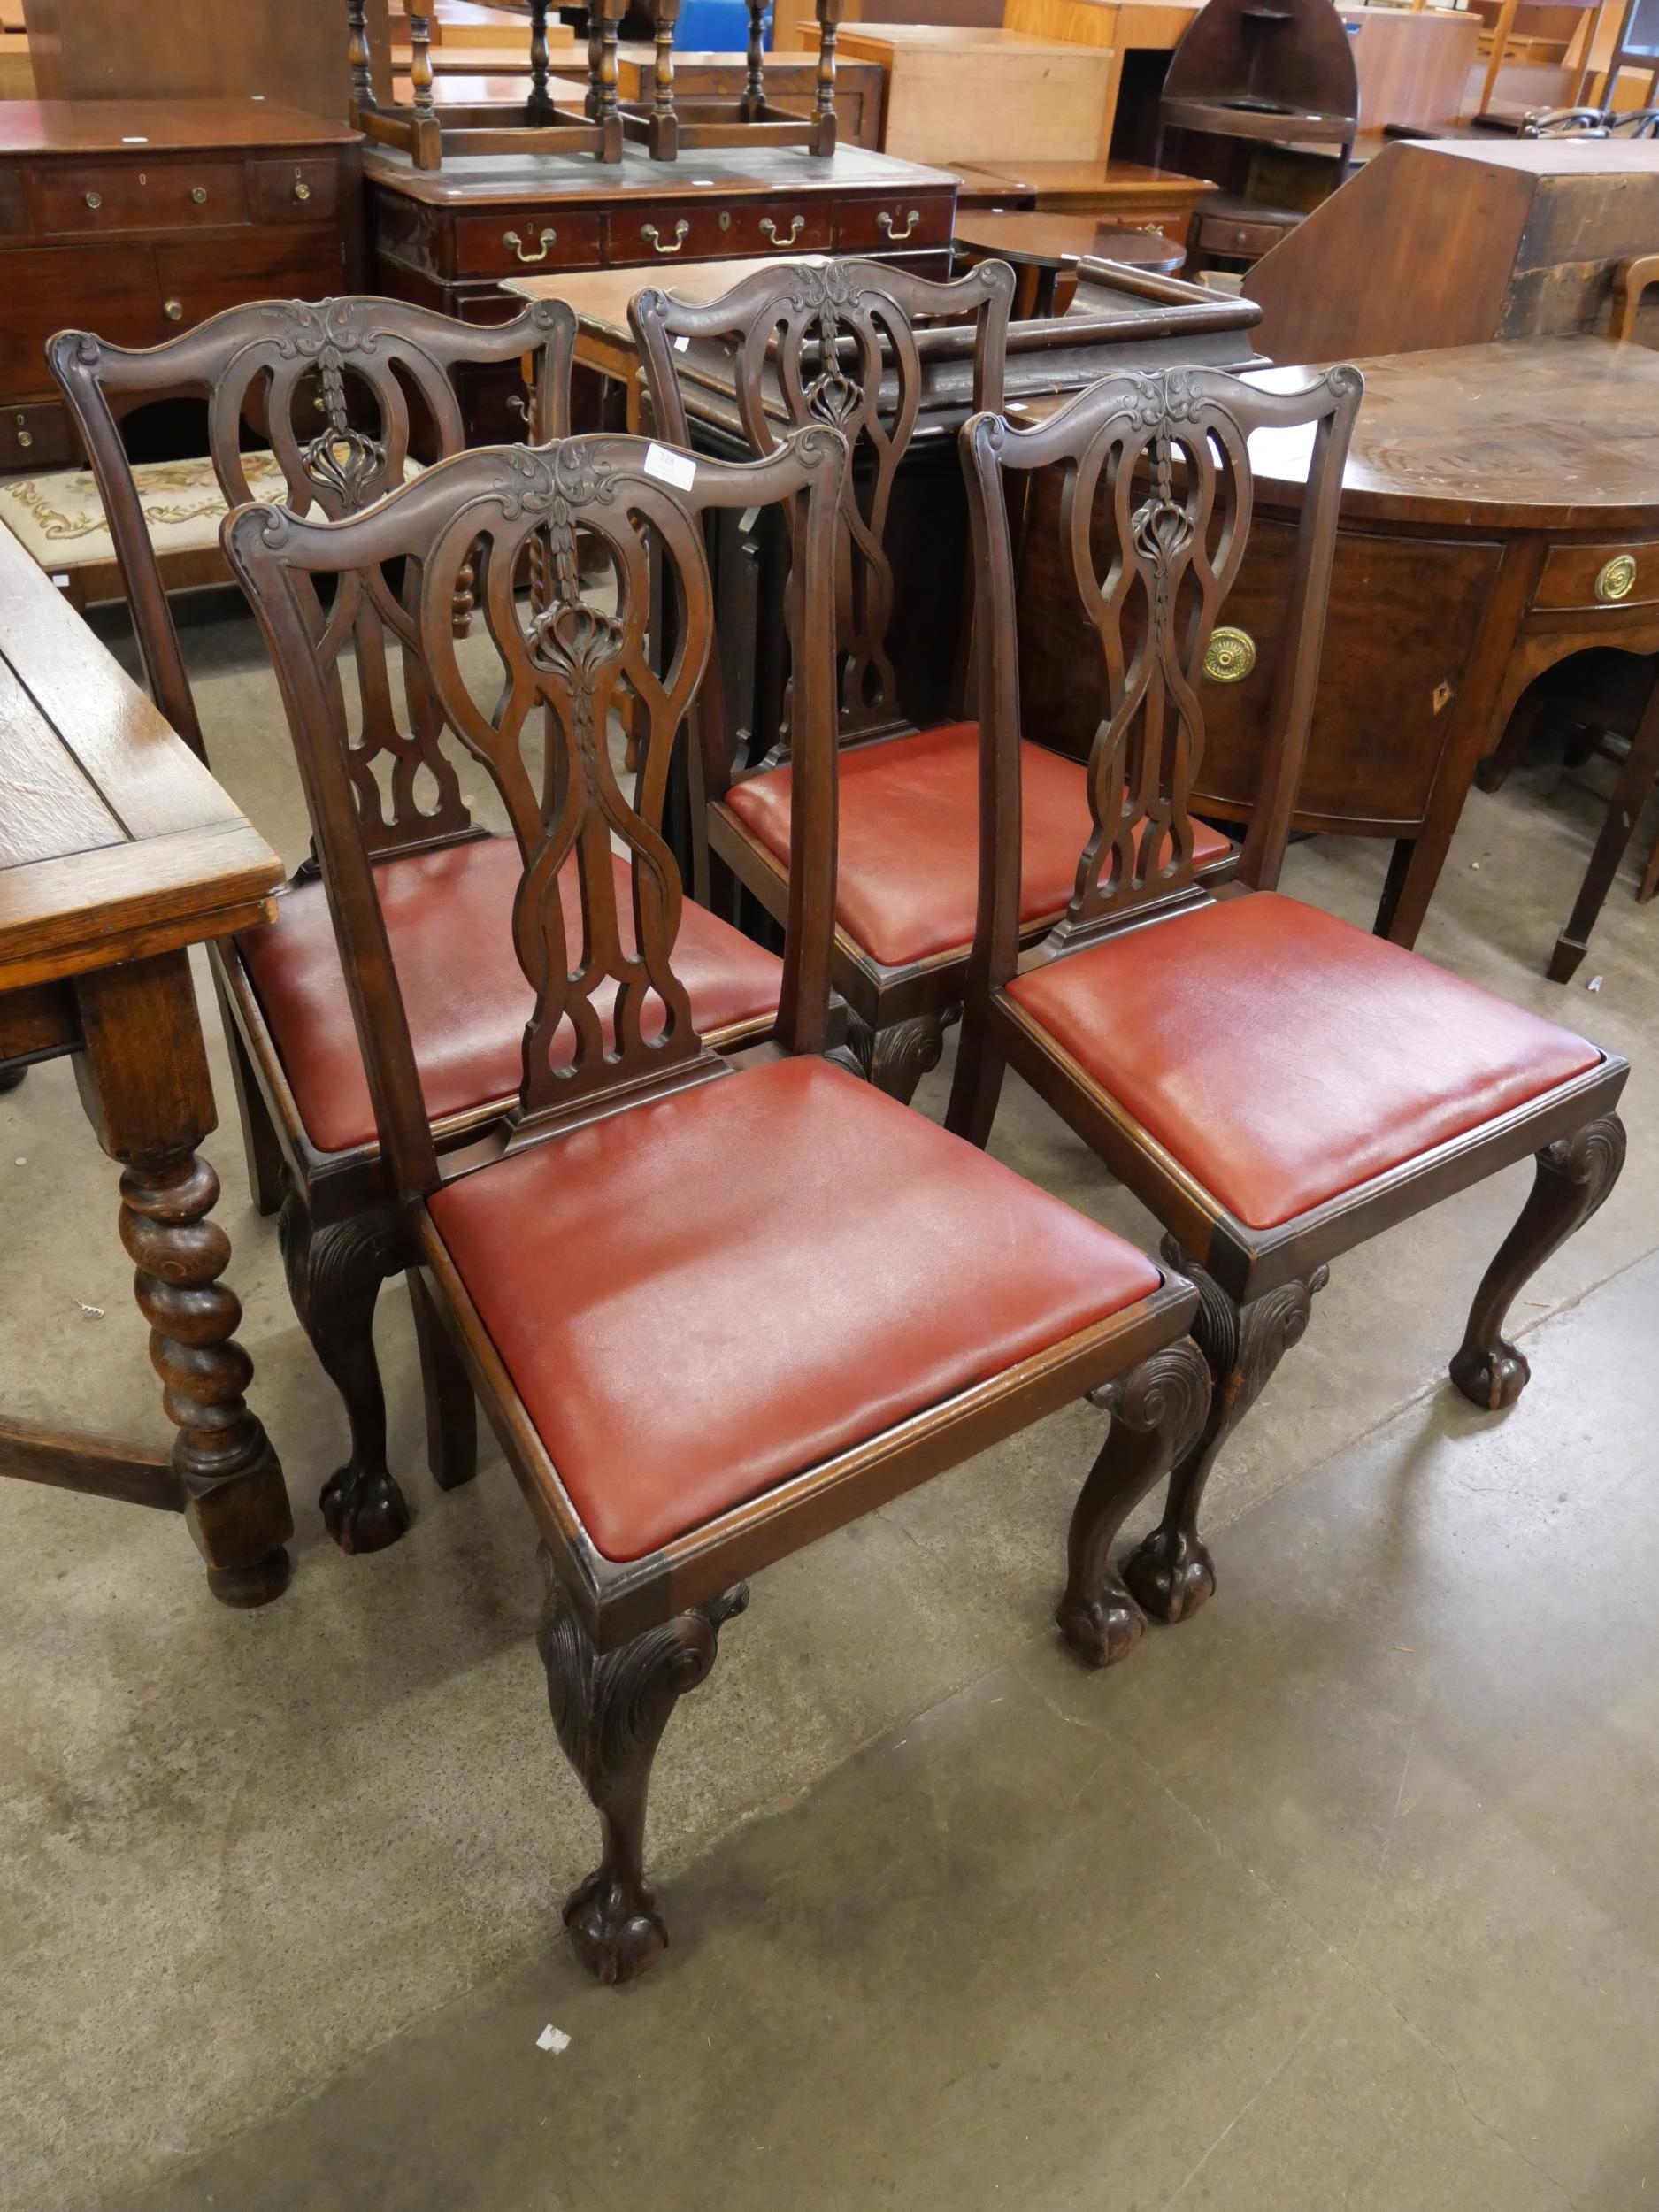 A set of four Chippendale style mahogany dining chairs